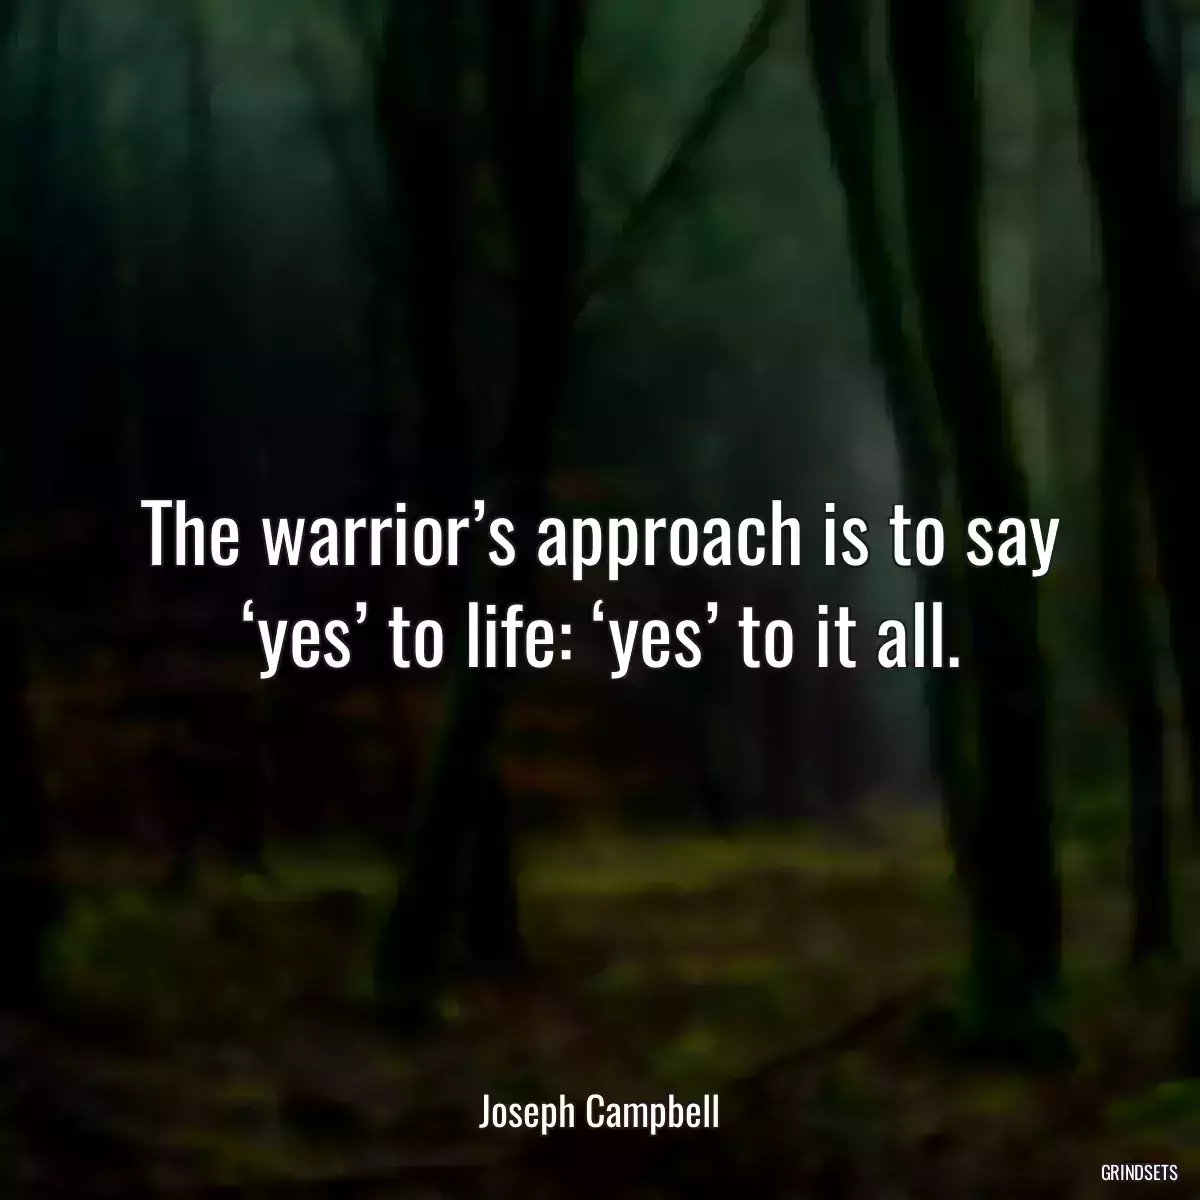 The warrior’s approach is to say ‘yes’ to life: ‘yes’ to it all.